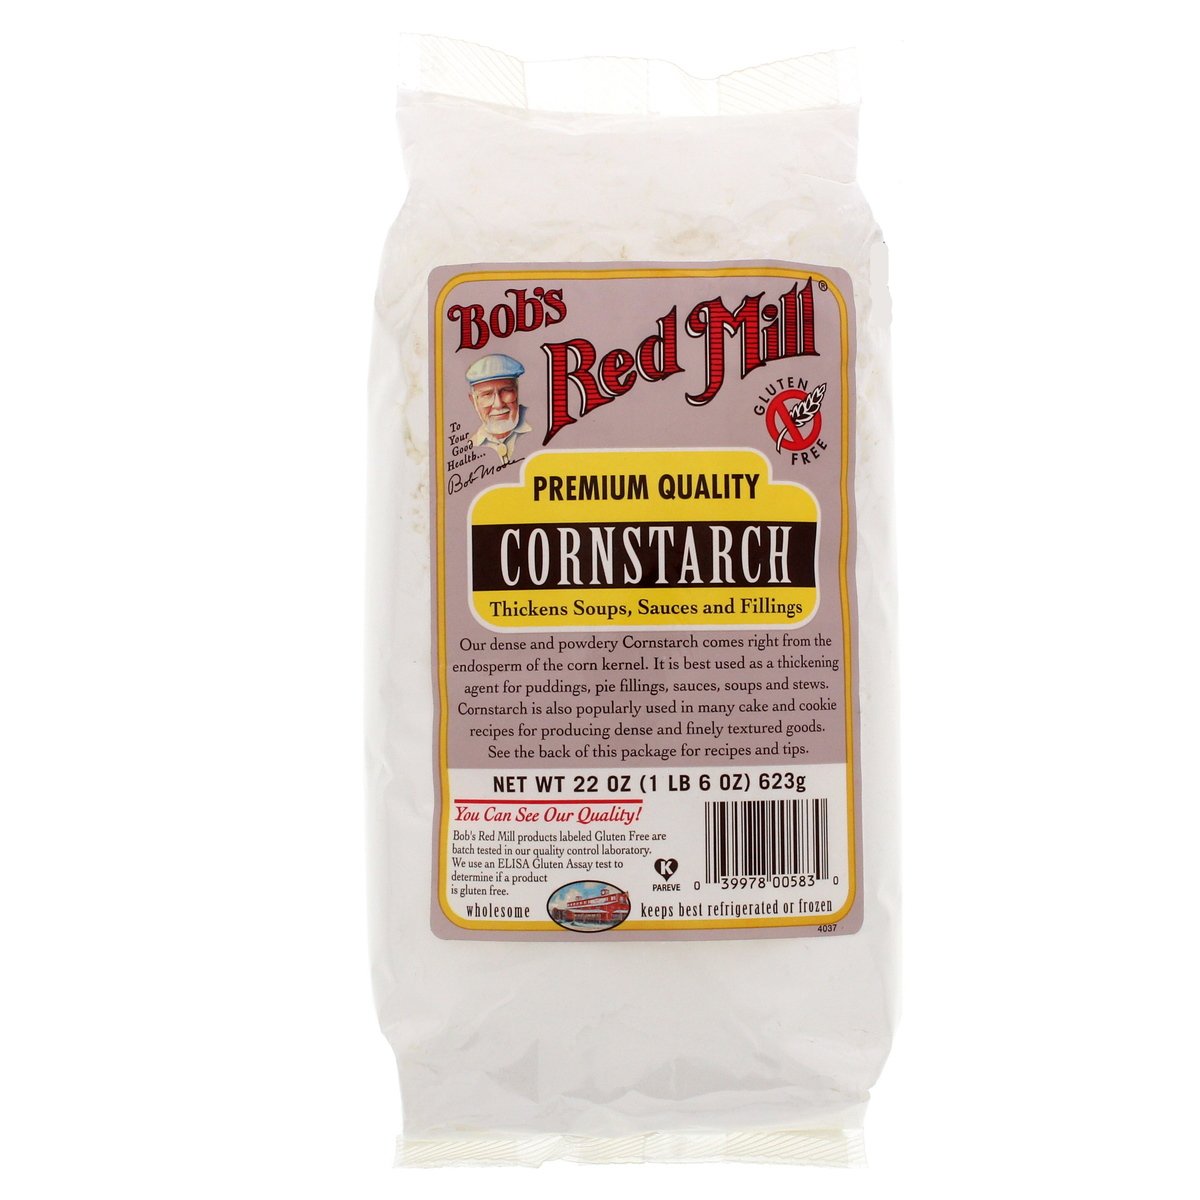 Bob's Red Mill Cornstarch Thickens Soups, Sauces And Fillings 623 g